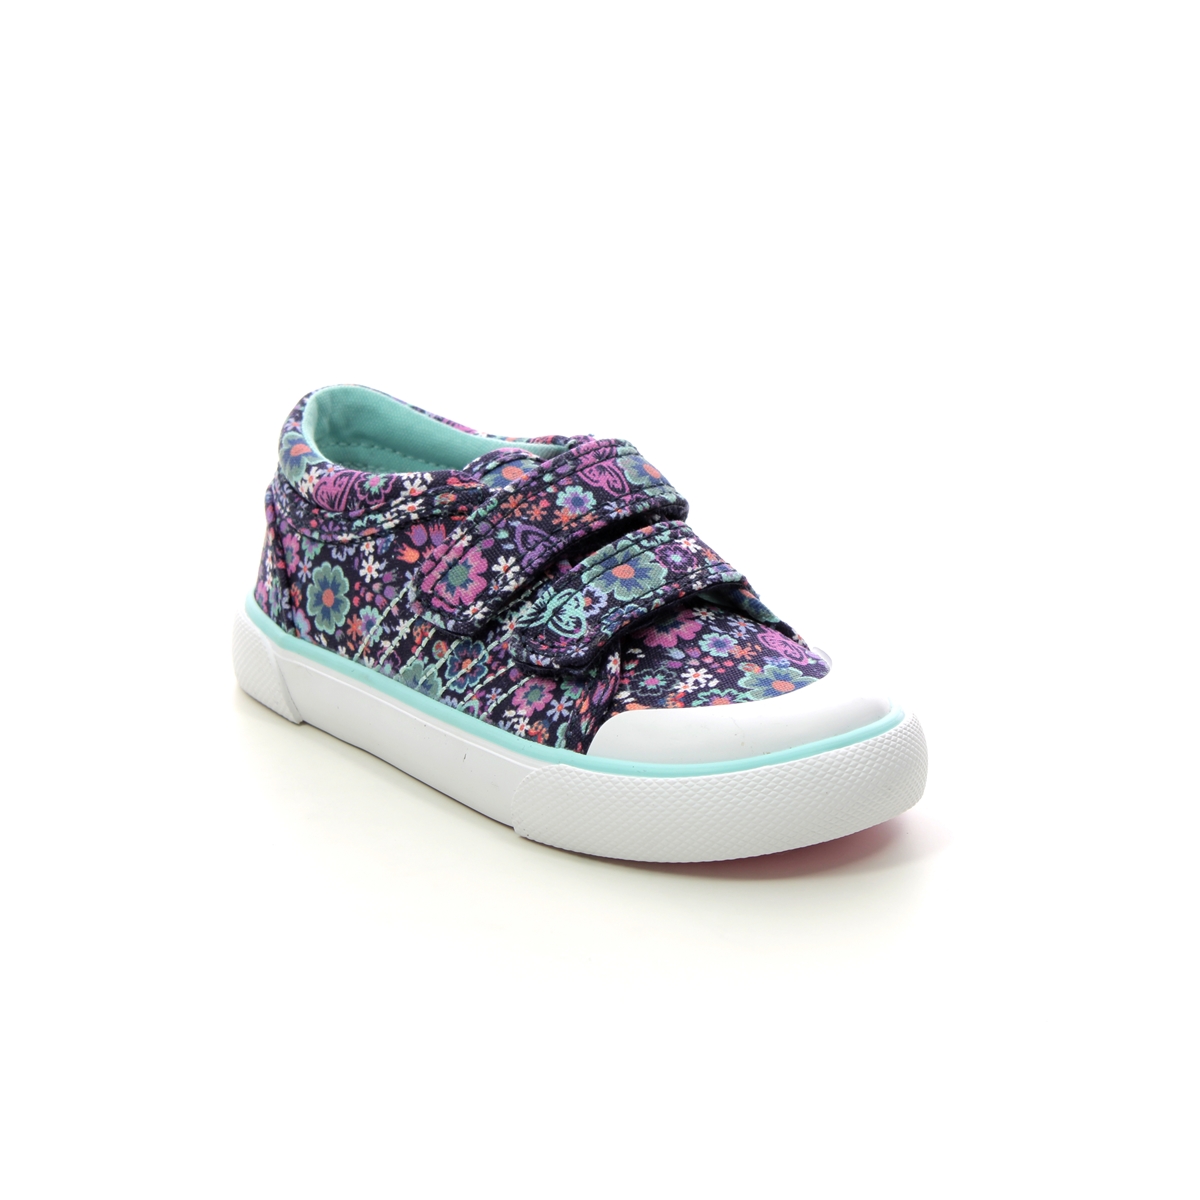 Start Rite Garden Canvas Navy Floral Kids toddler girls trainers 6194-96F in a Plain Canvas in Size 5.5